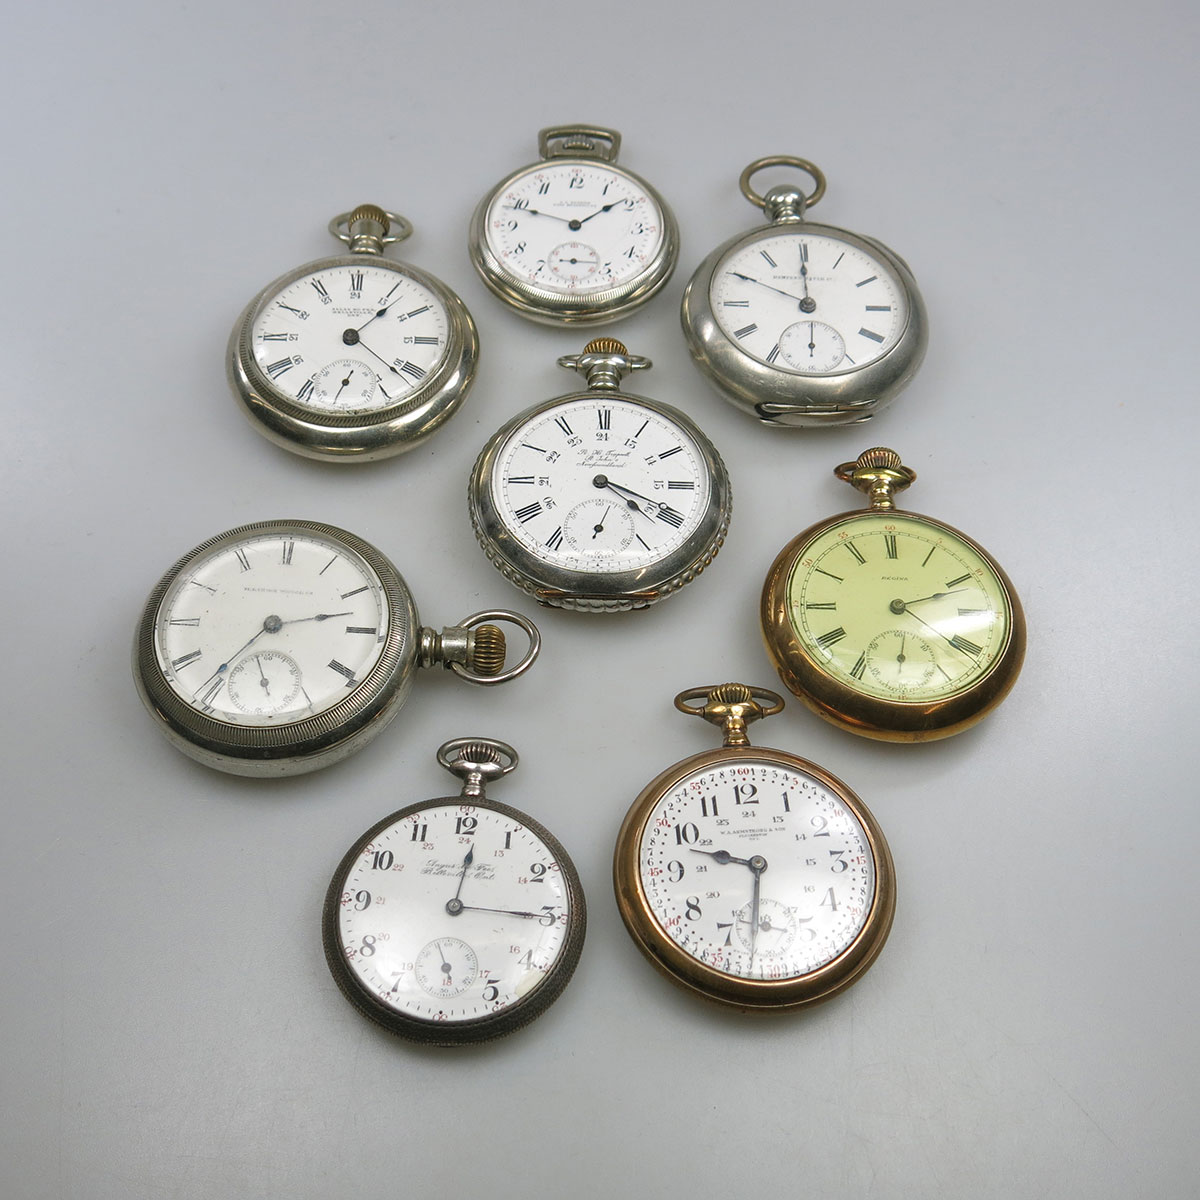 8 Various Pocket Watches With Makers Or Retailers From Canada 